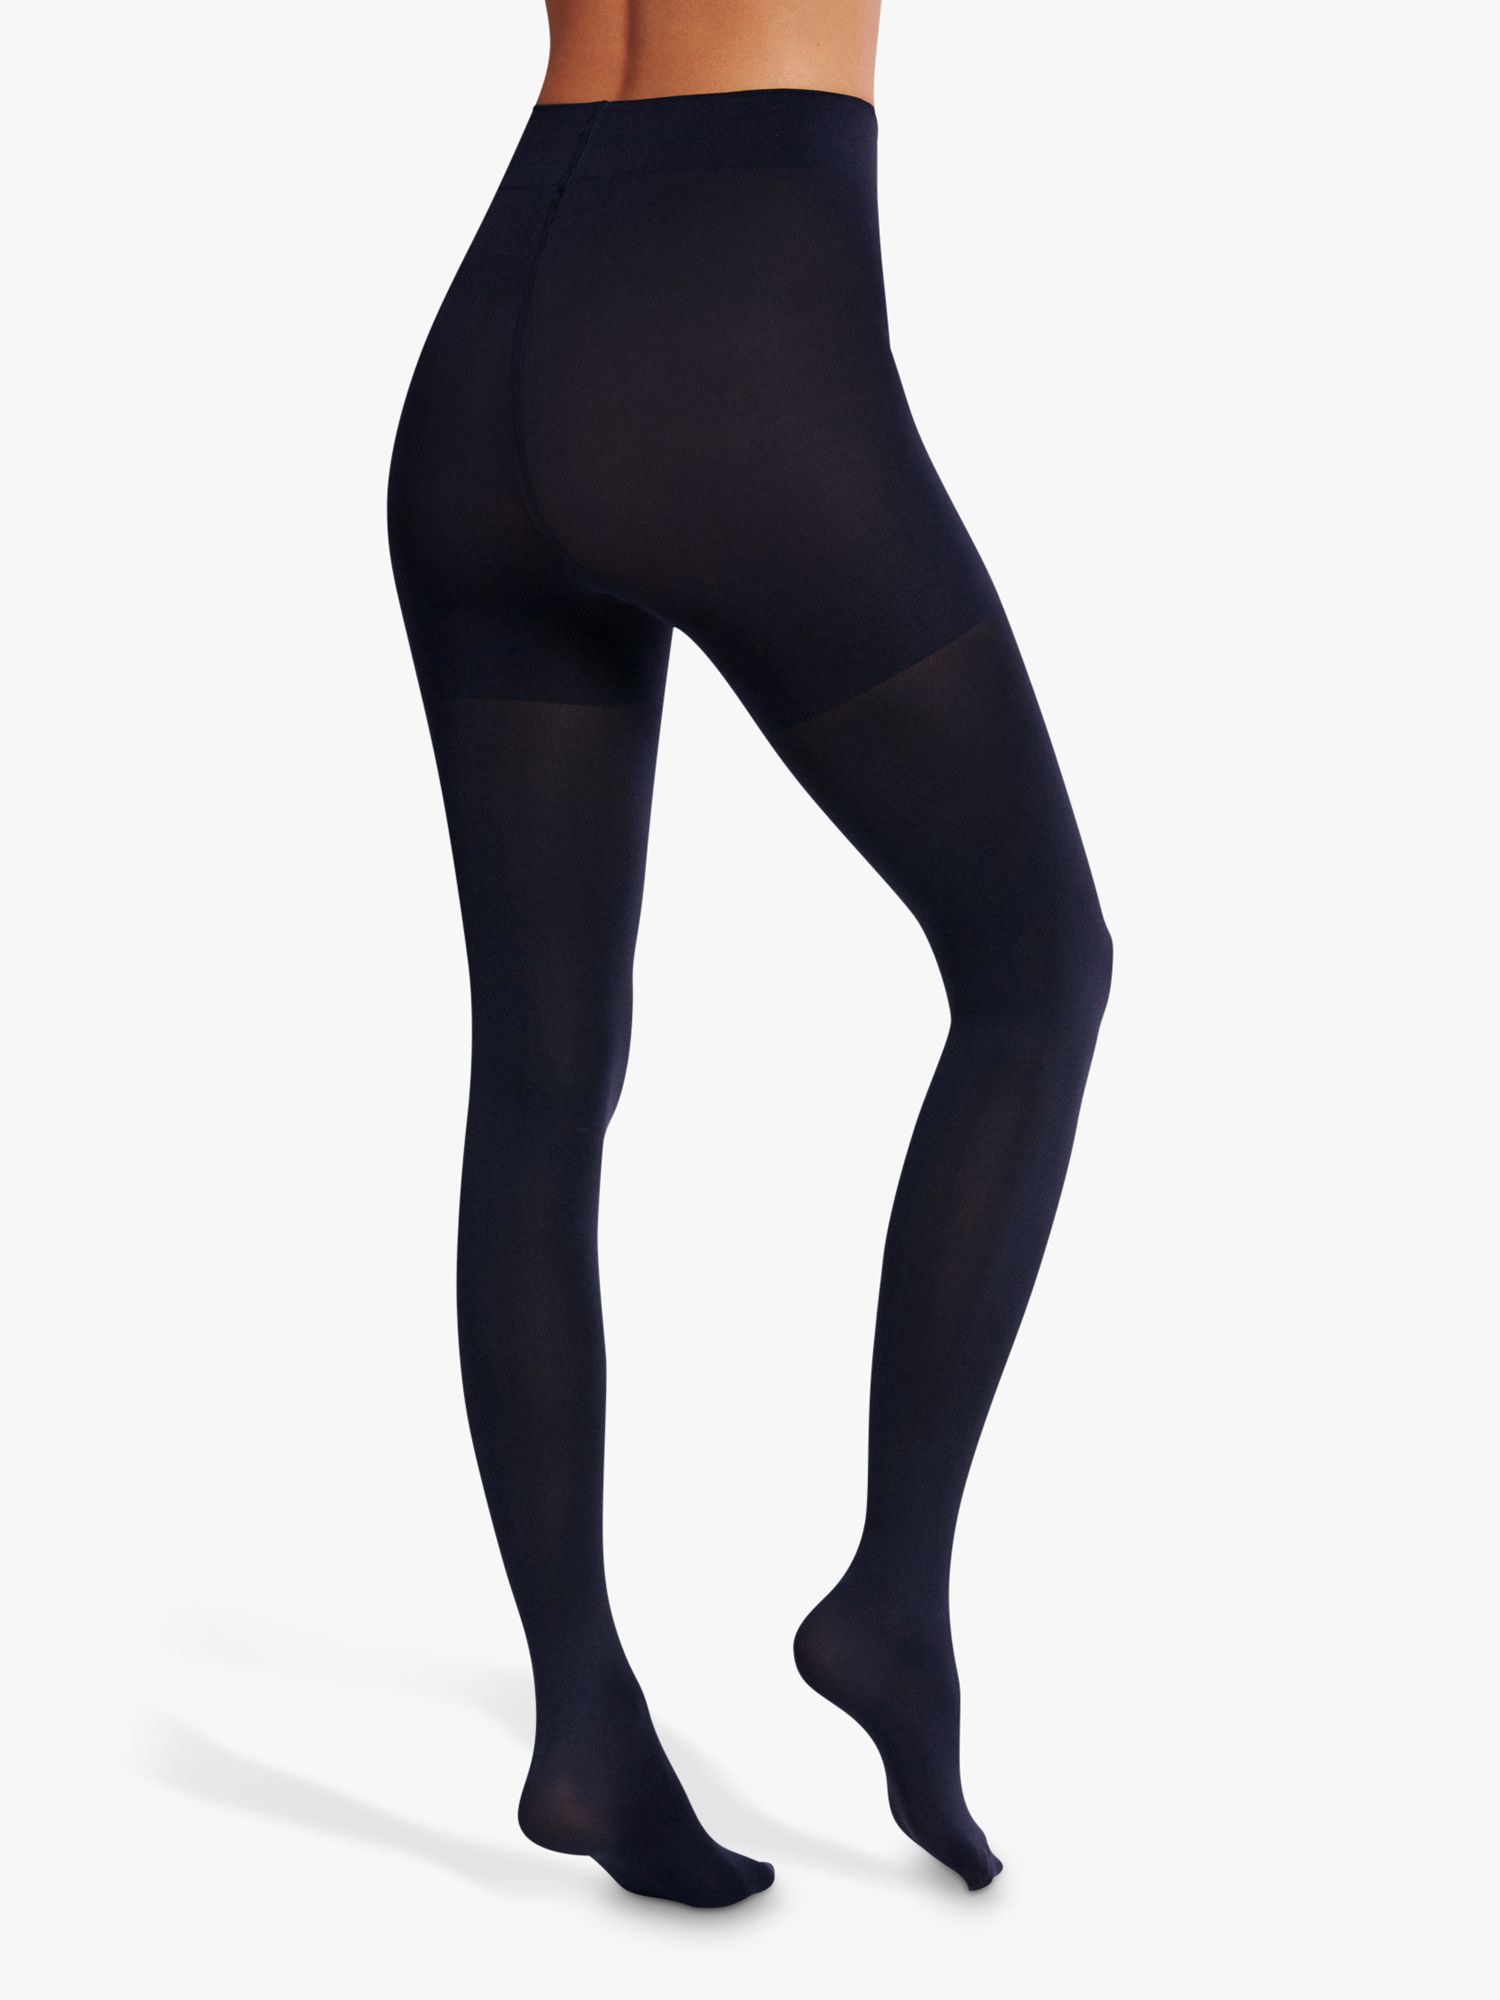 Wolford Aurora 70 Opaque Tights In Stock At UK Tights